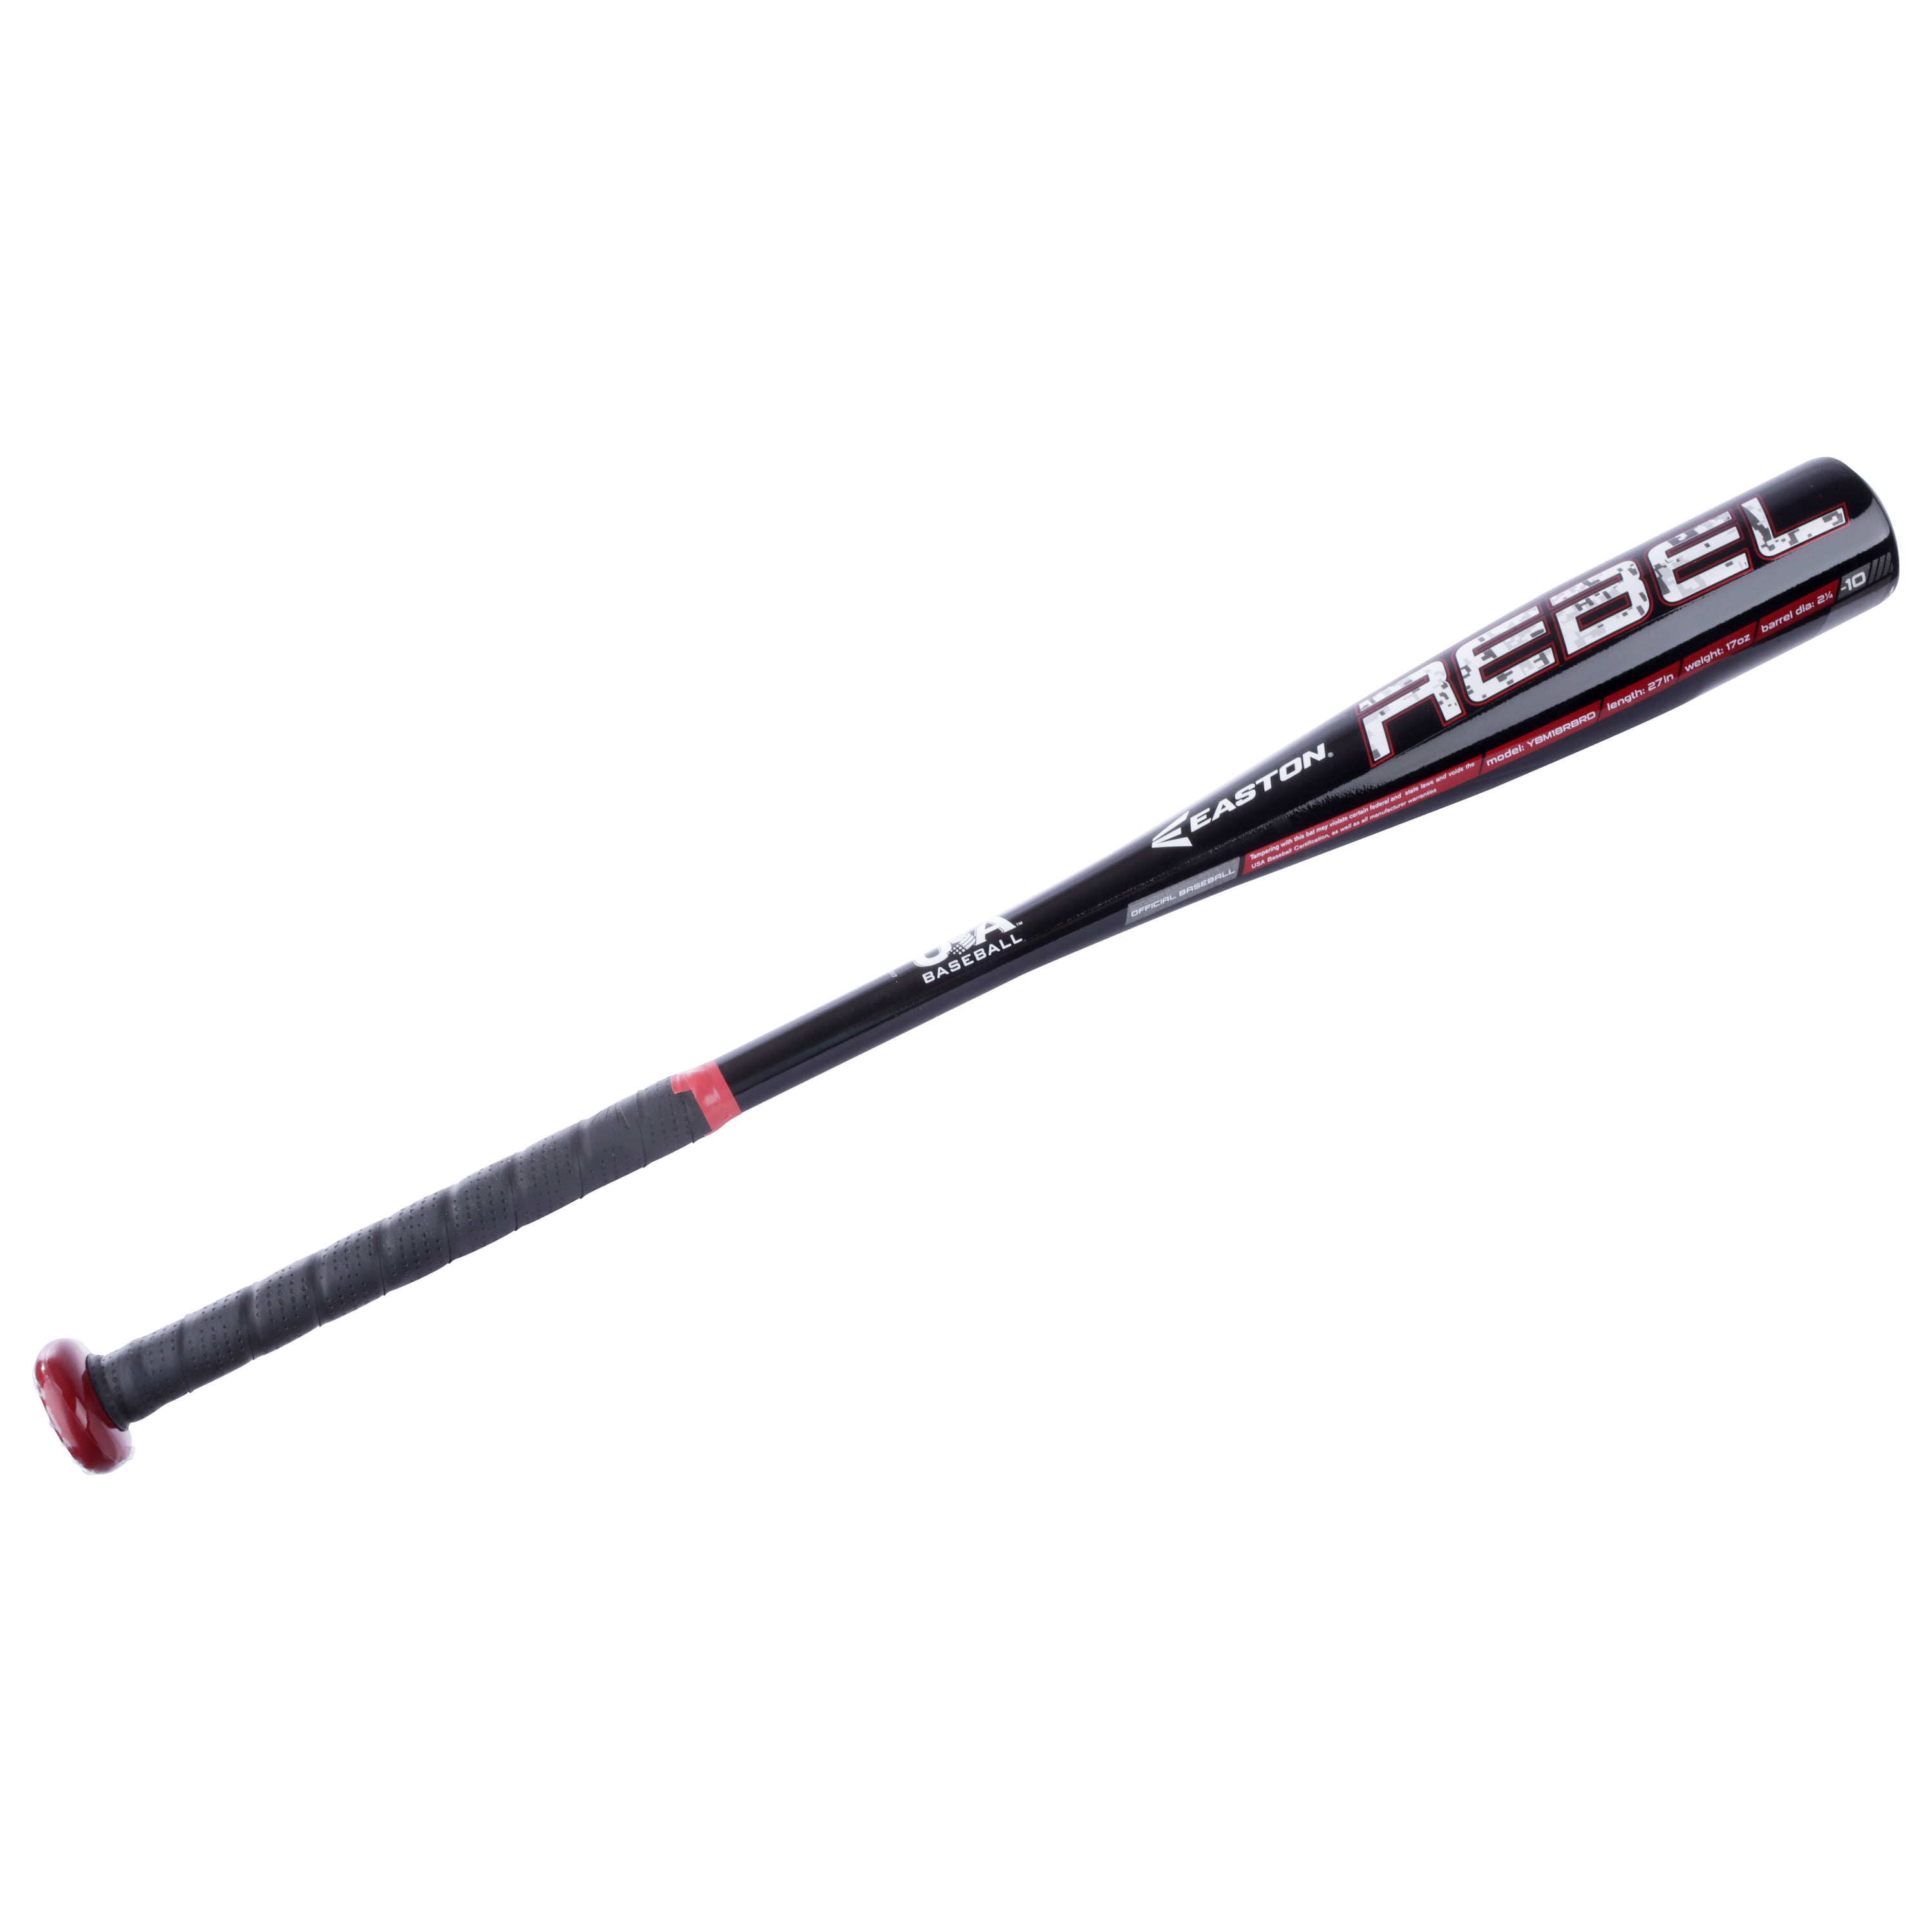 Details about   NWT Easton Rebel Digi Camo Youth Baseball Bat Blk/Red Free Shipping 